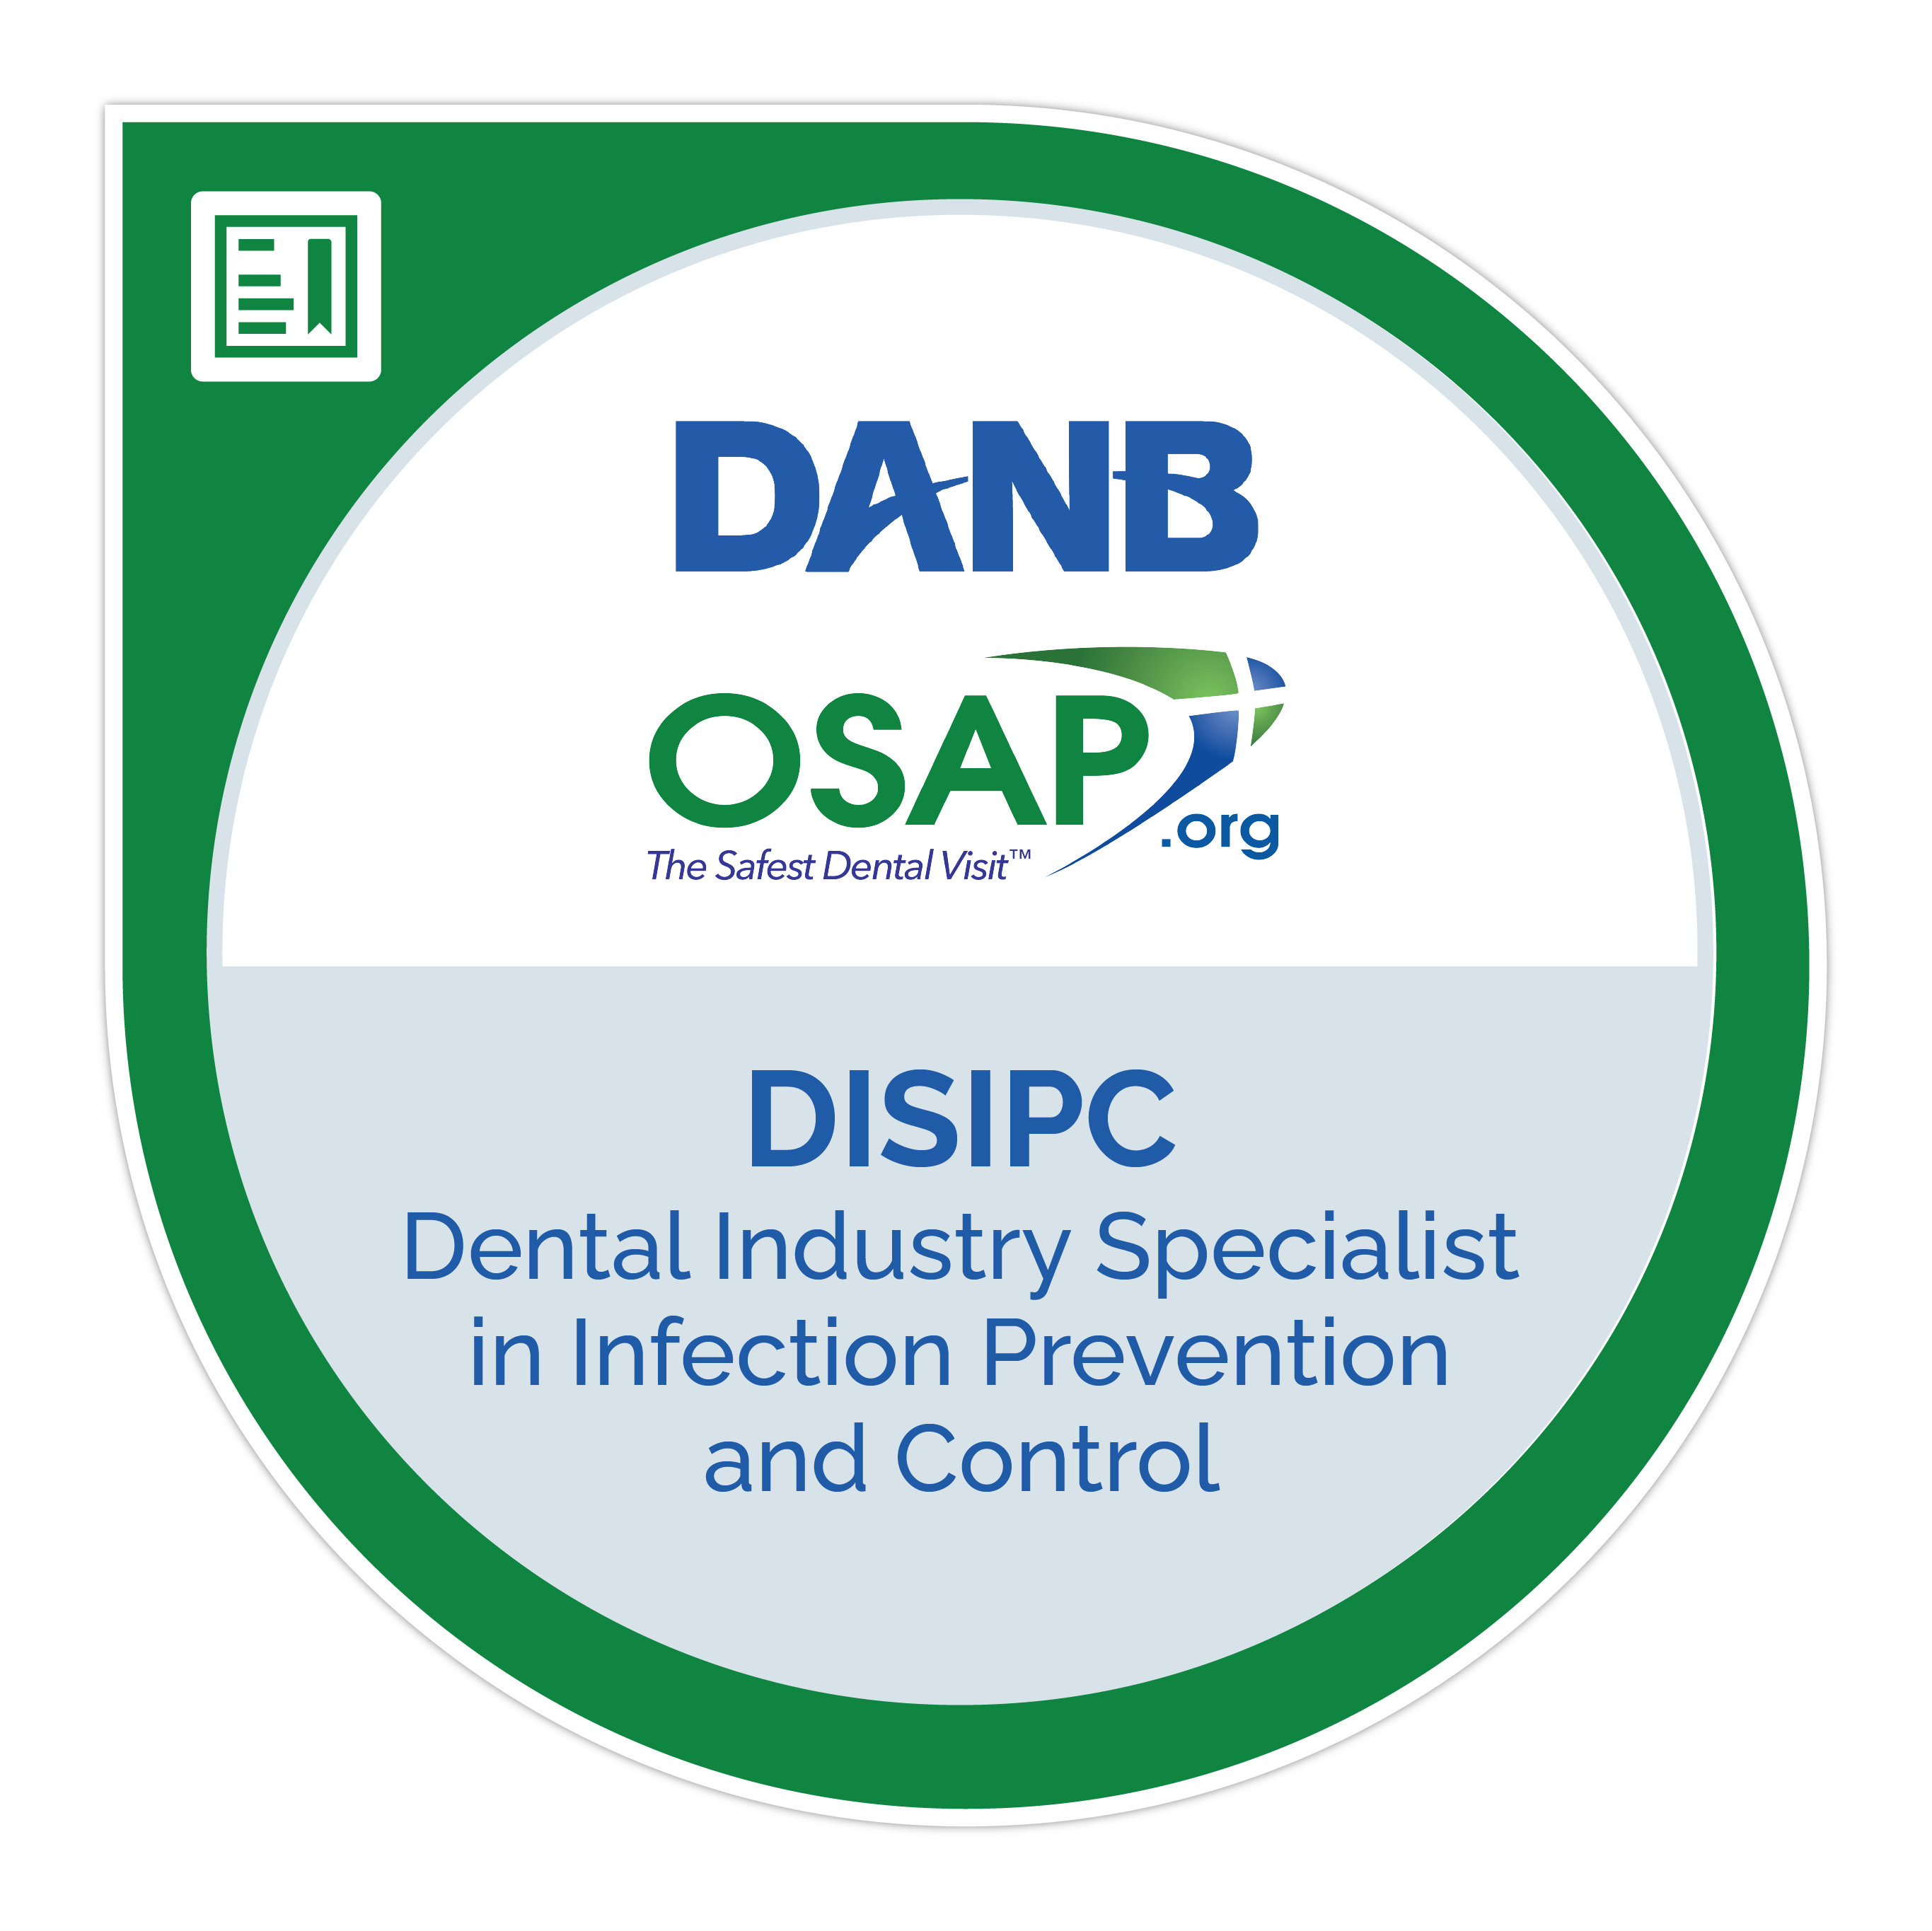 DISIPC - Dental Industry Specialist in Infection Prevention and Control